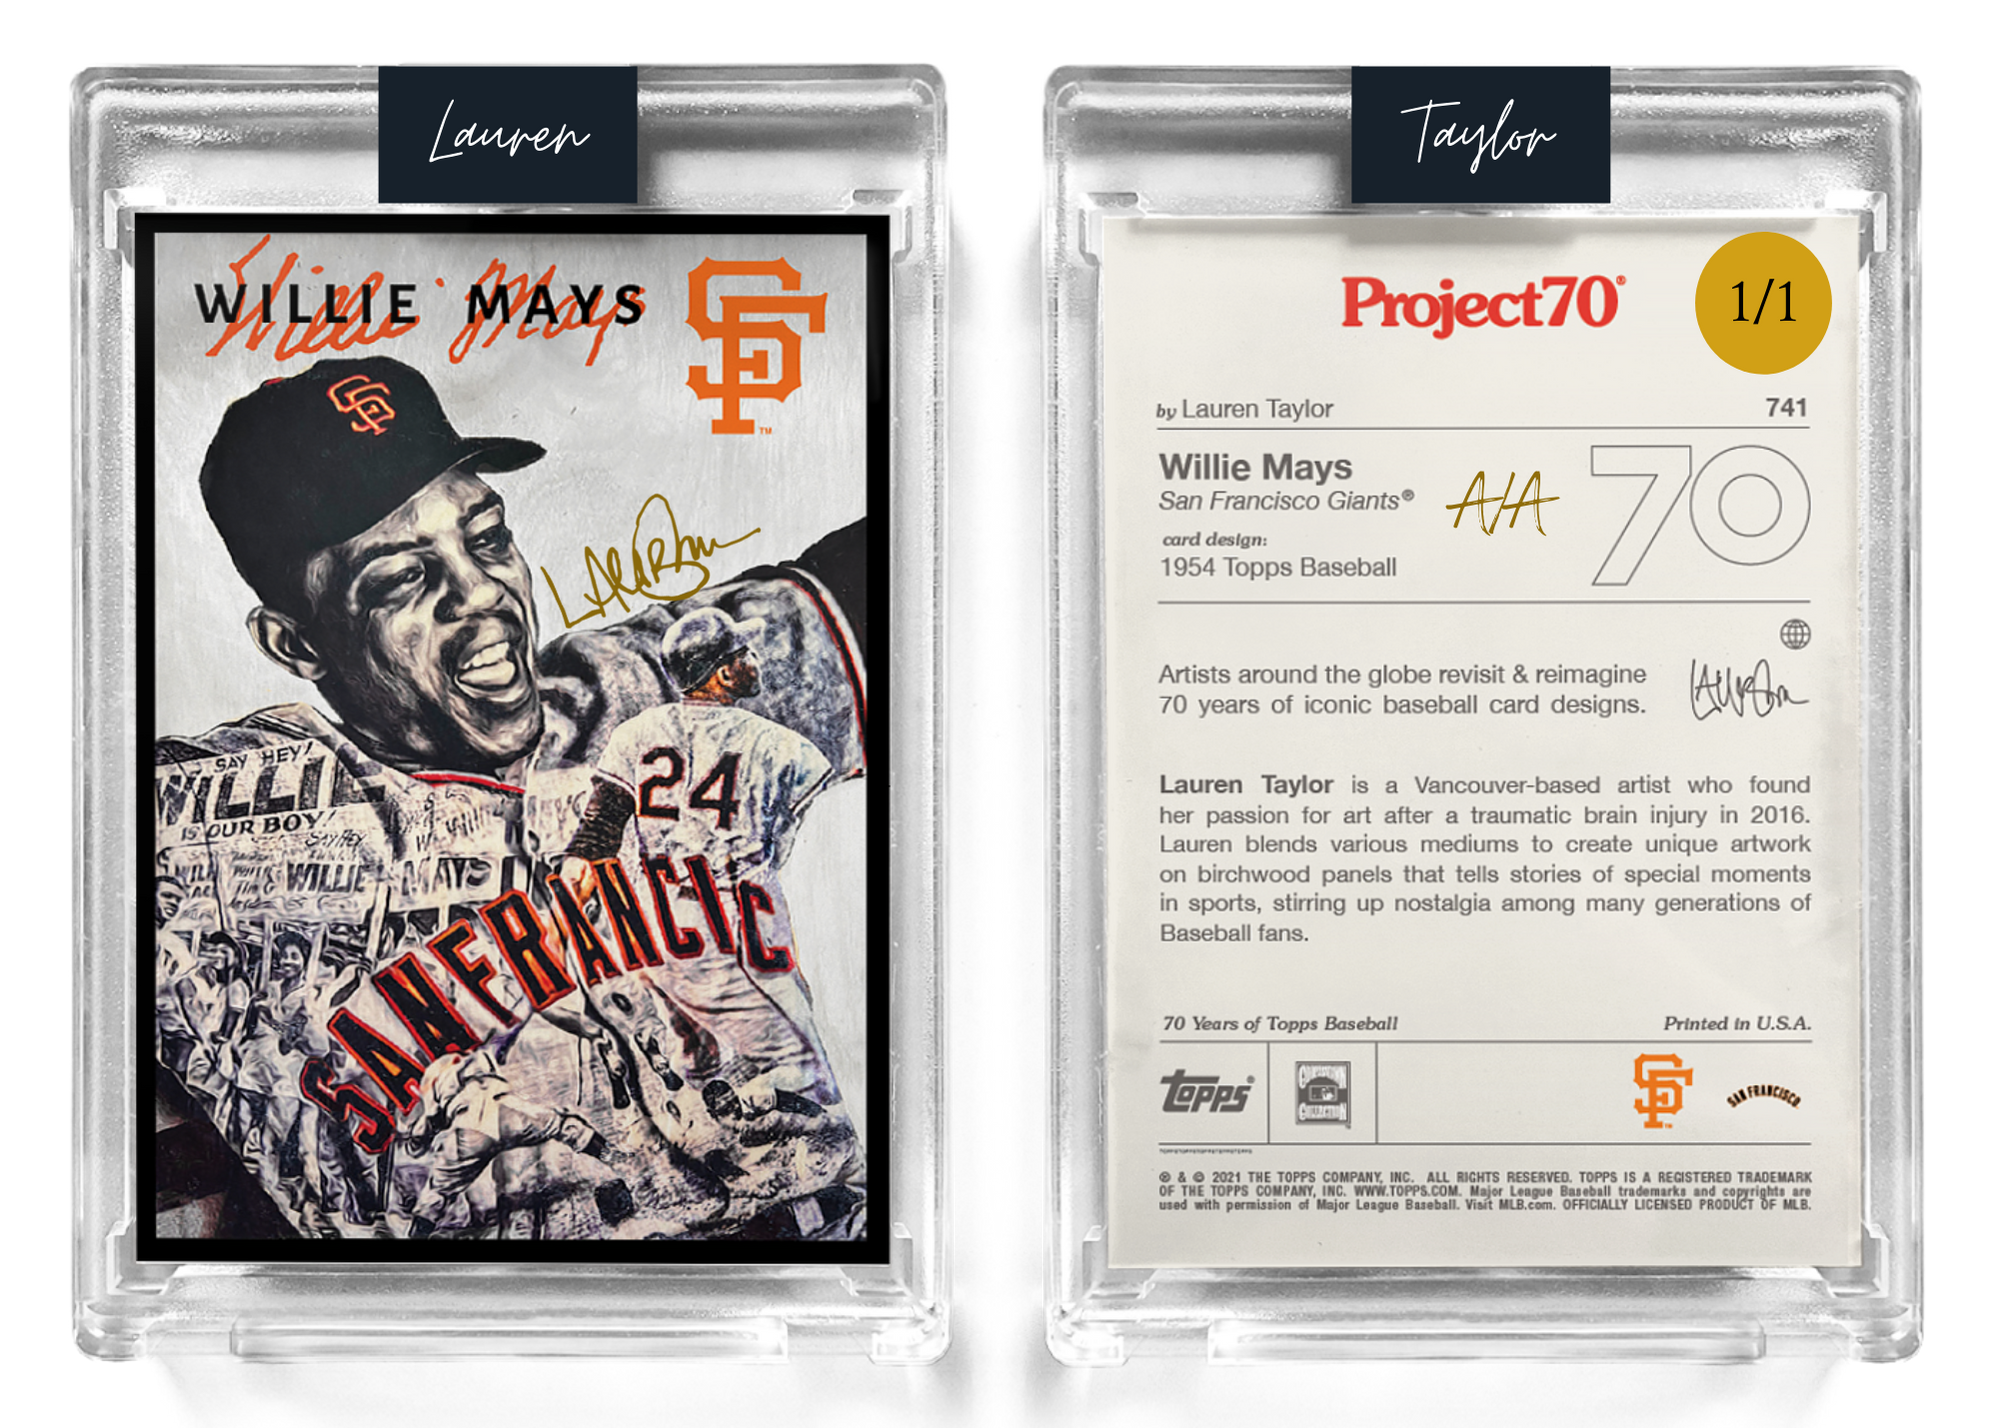 /1 Gold Artist Signature - Topps Project 70 130pt card #741 by Lauren Taylor - Willie Mays